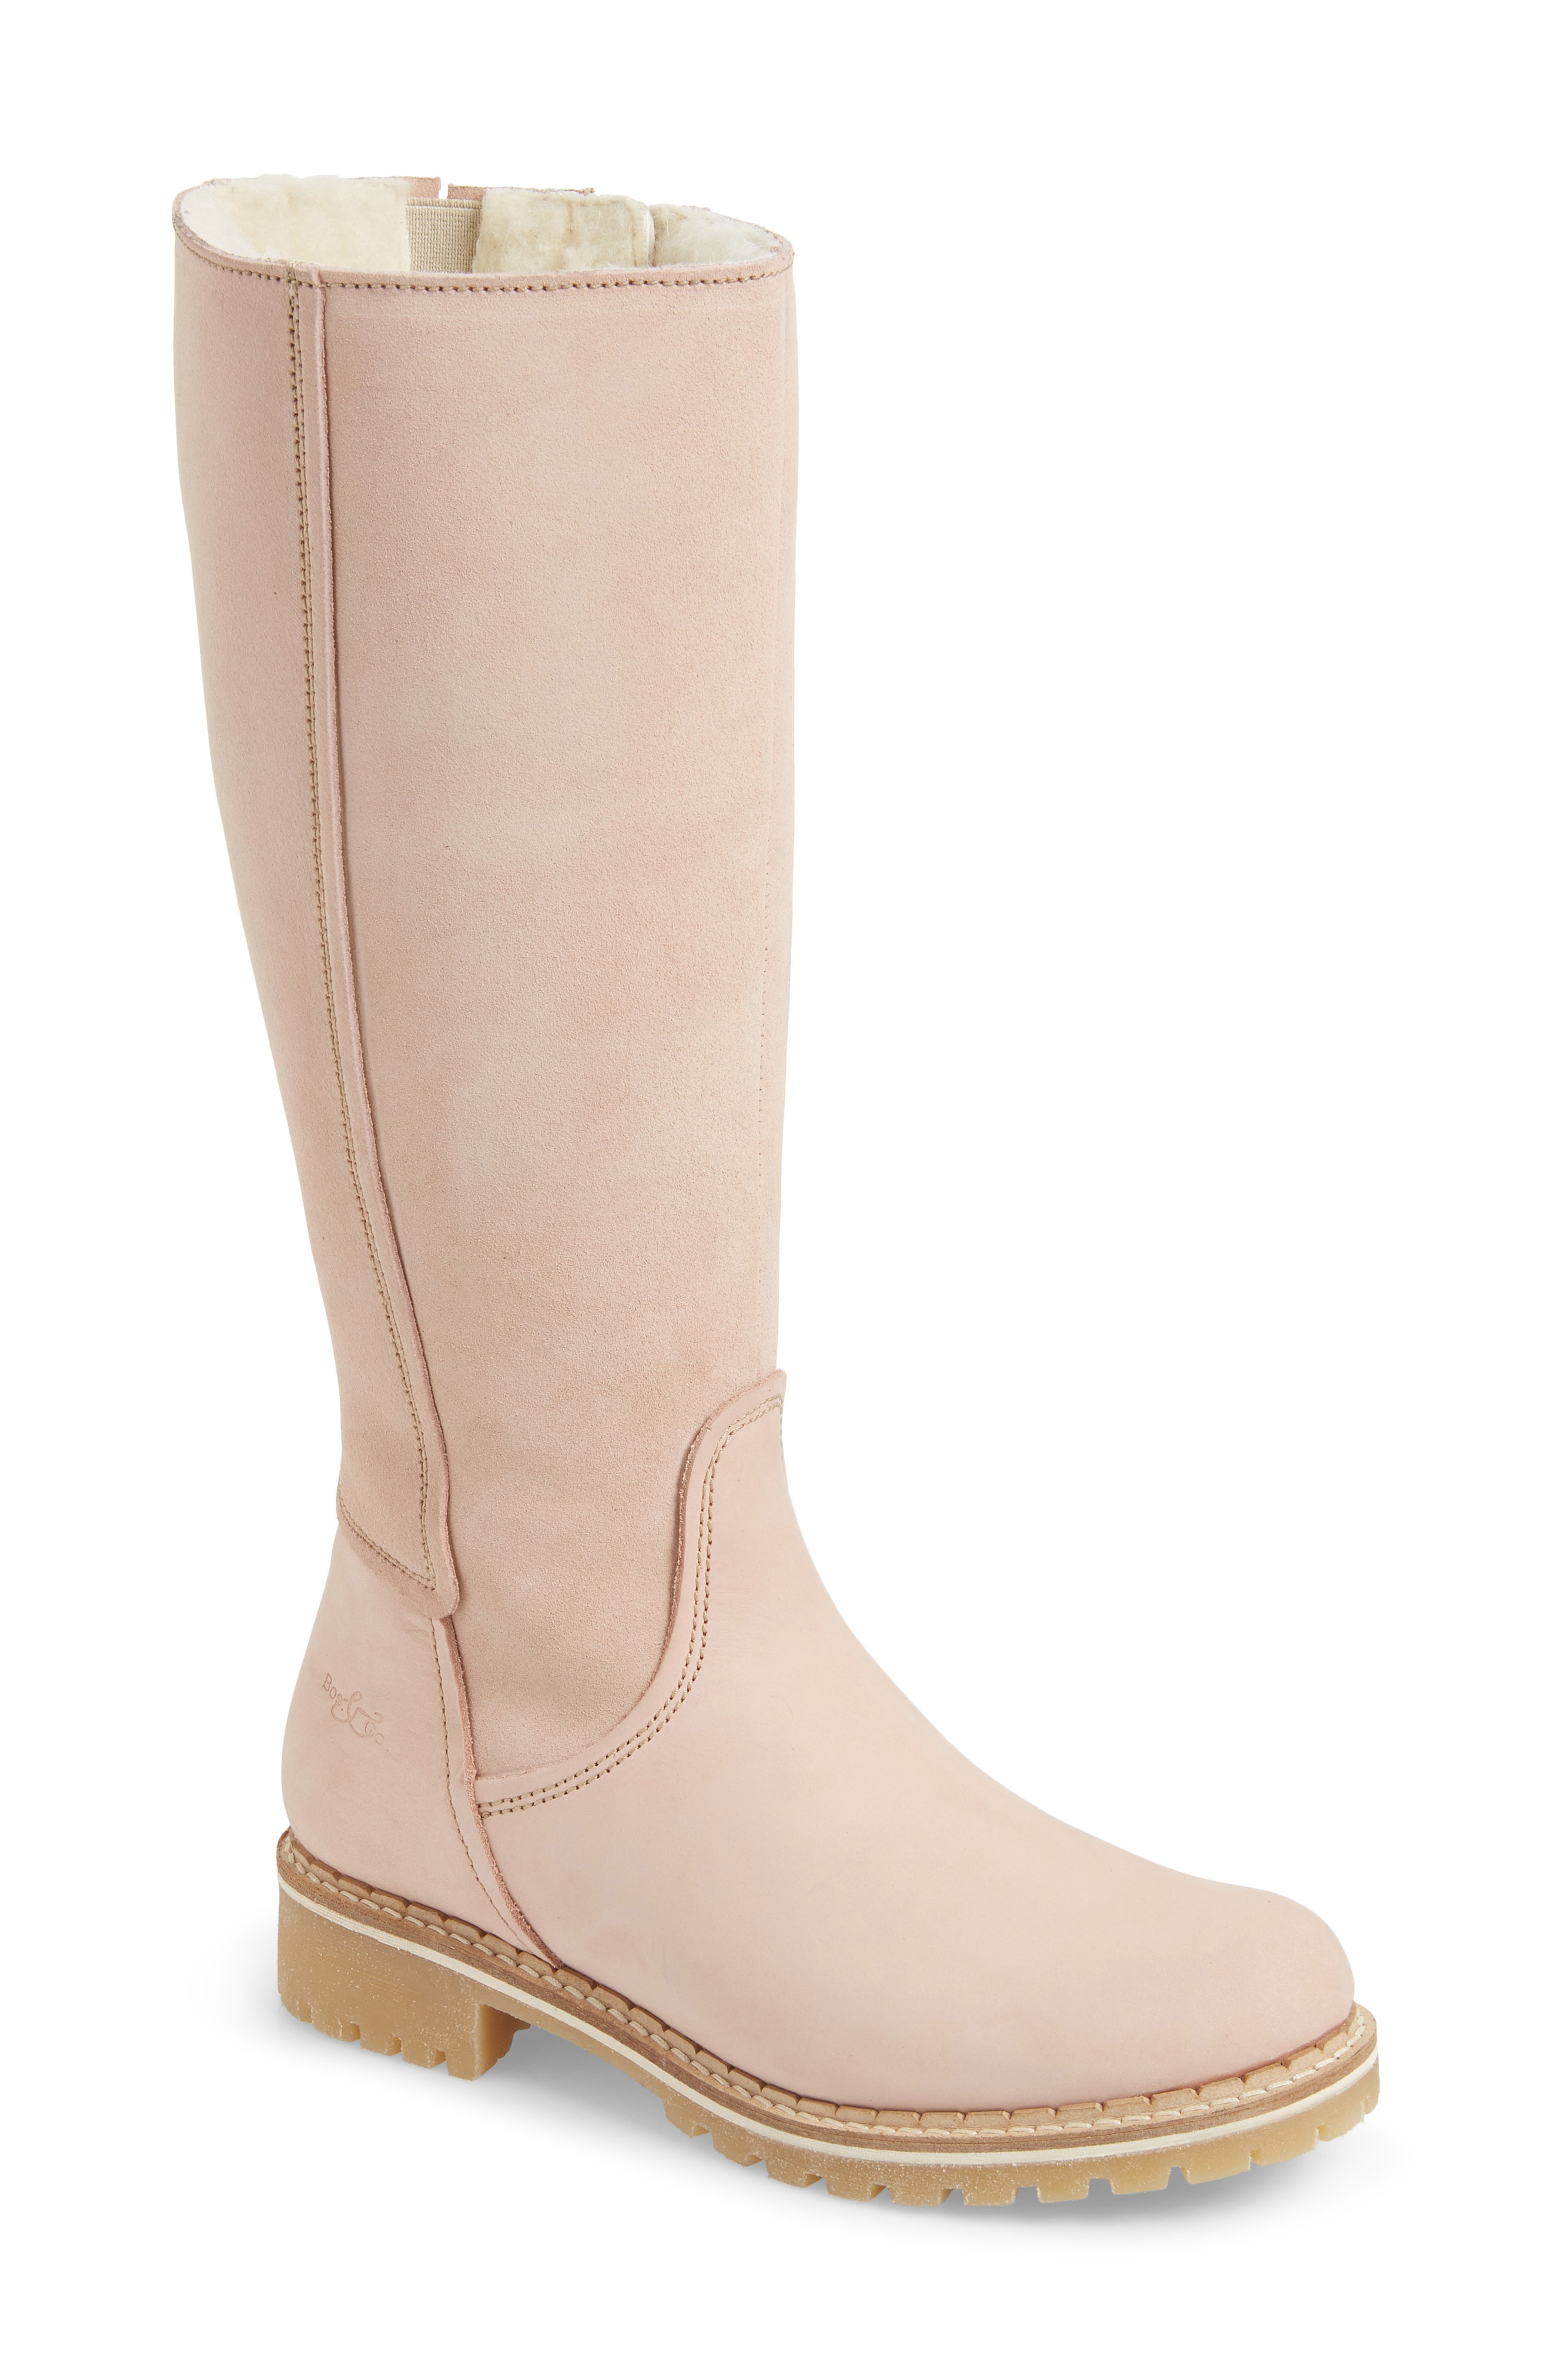 Boots in pink – fantastic shoes that enhance every outfit